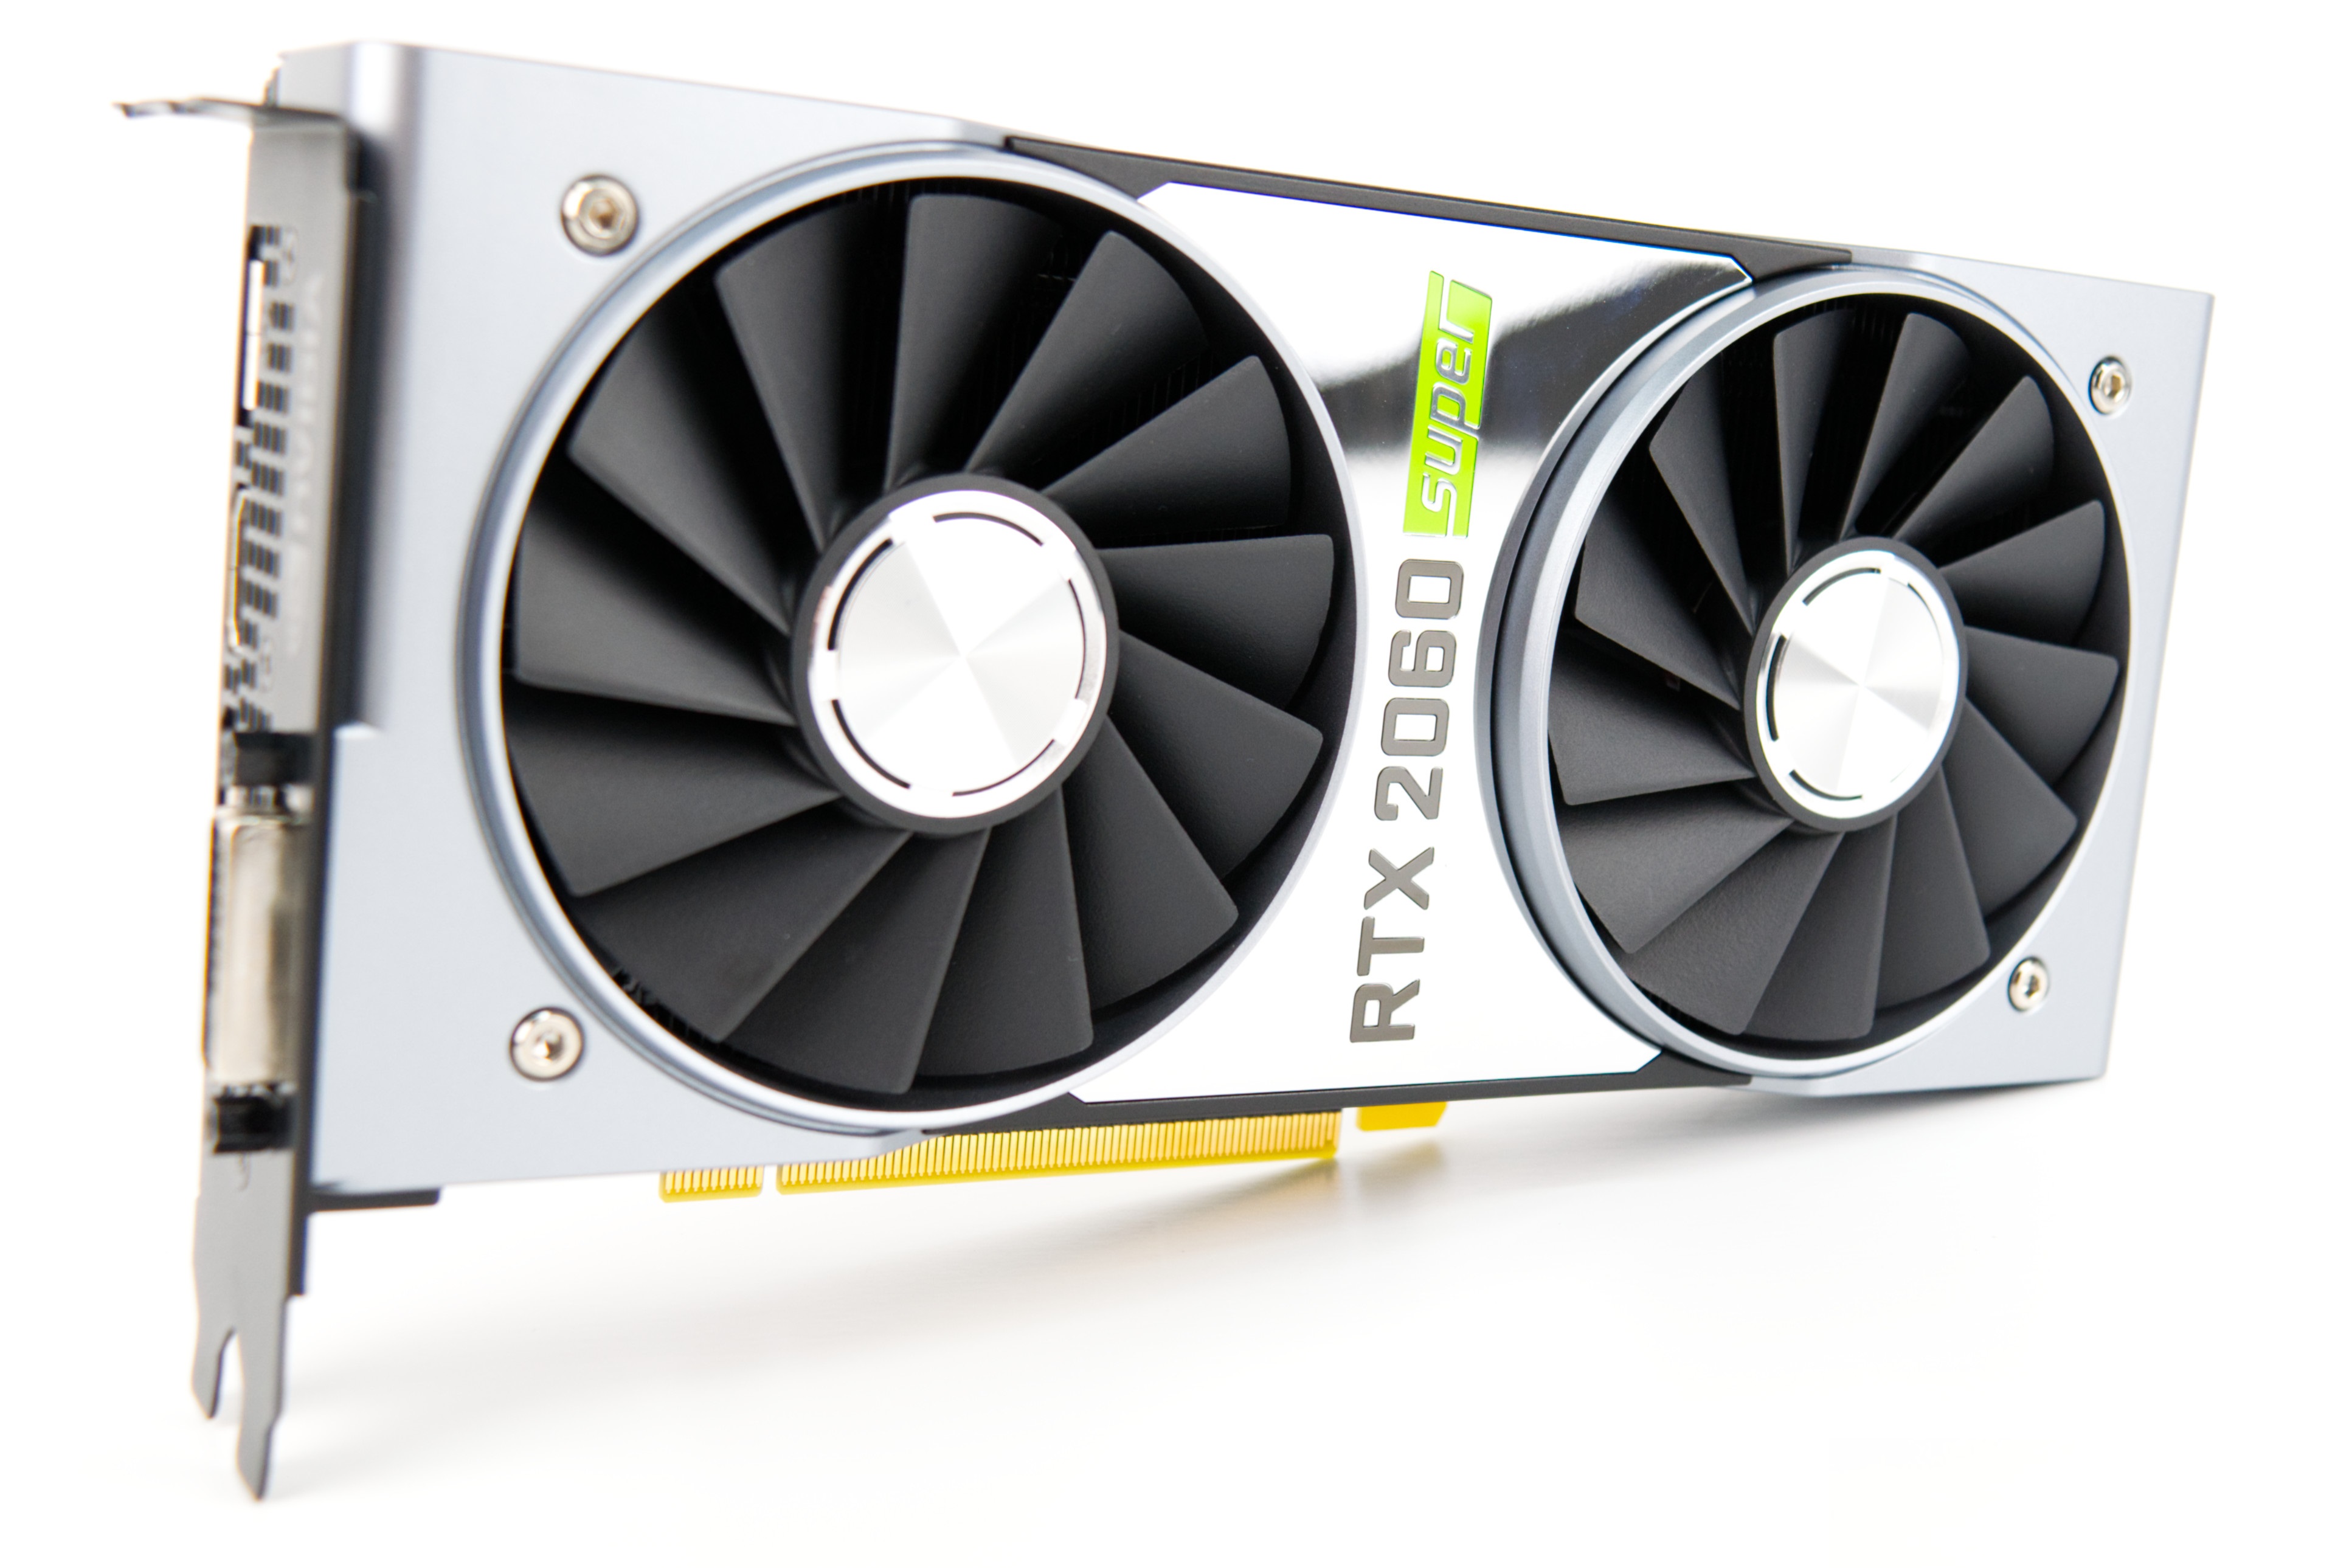 bison ring krog Nvidia GeForce RTX 2060 Super Review: The entry-level GPU finally comes  with 8 GB of VRAM - NotebookCheck.net Reviews